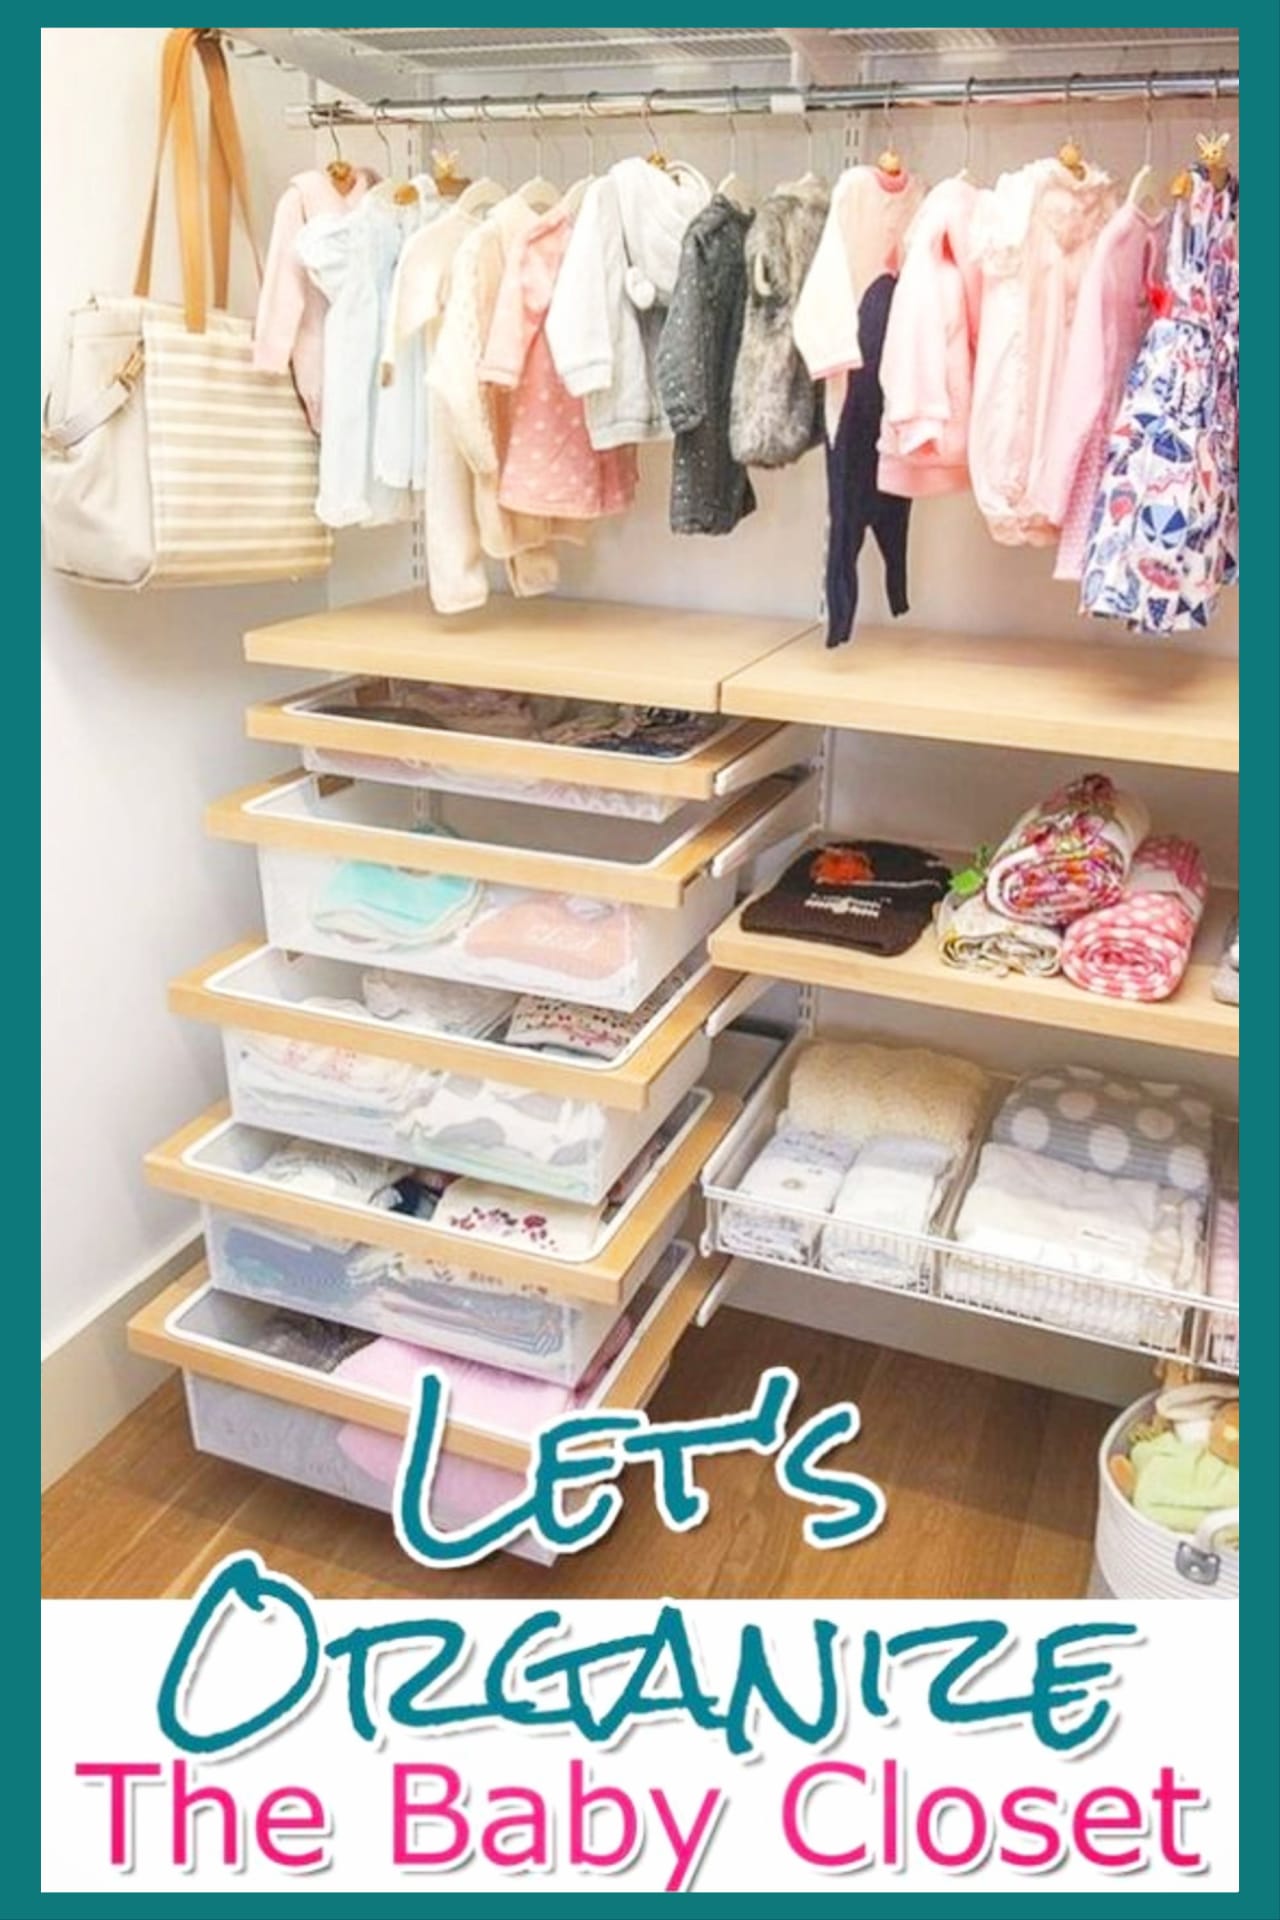 DIY organization ideas for the home - baby closet organization ideas - clever storage and organization ideas for the nursery closet